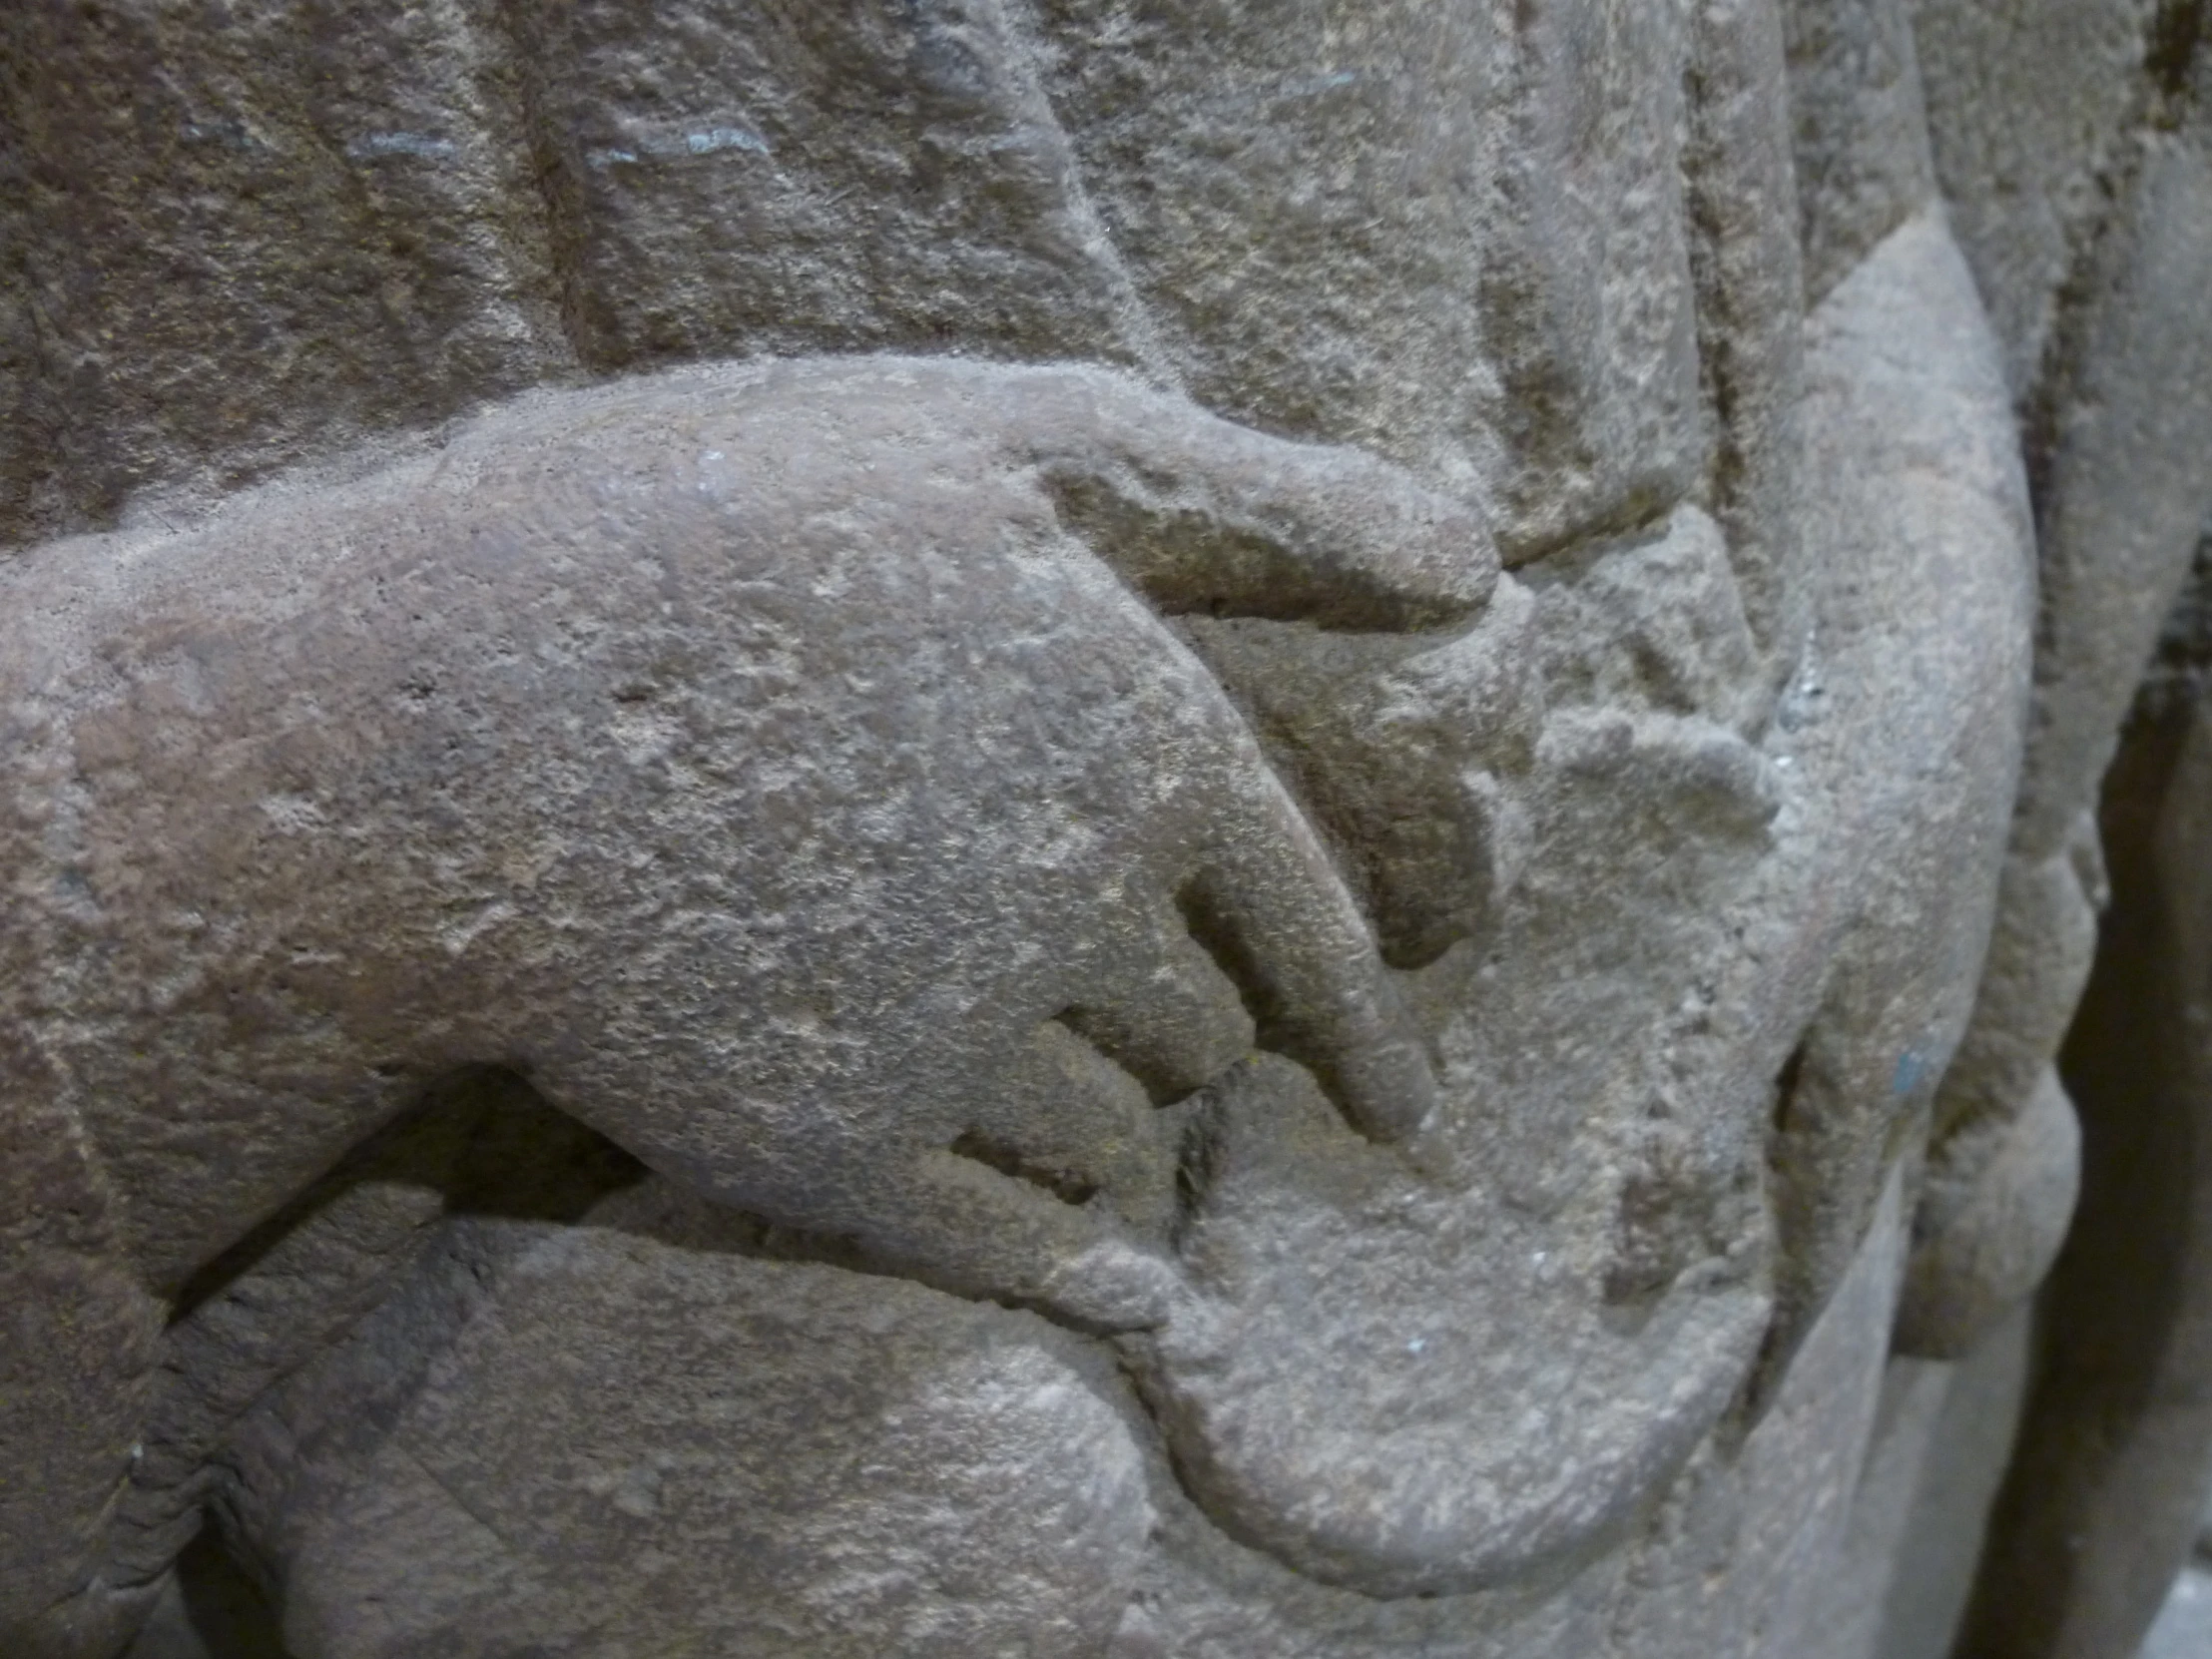 a close up s of stone carvings, resembling an elephant